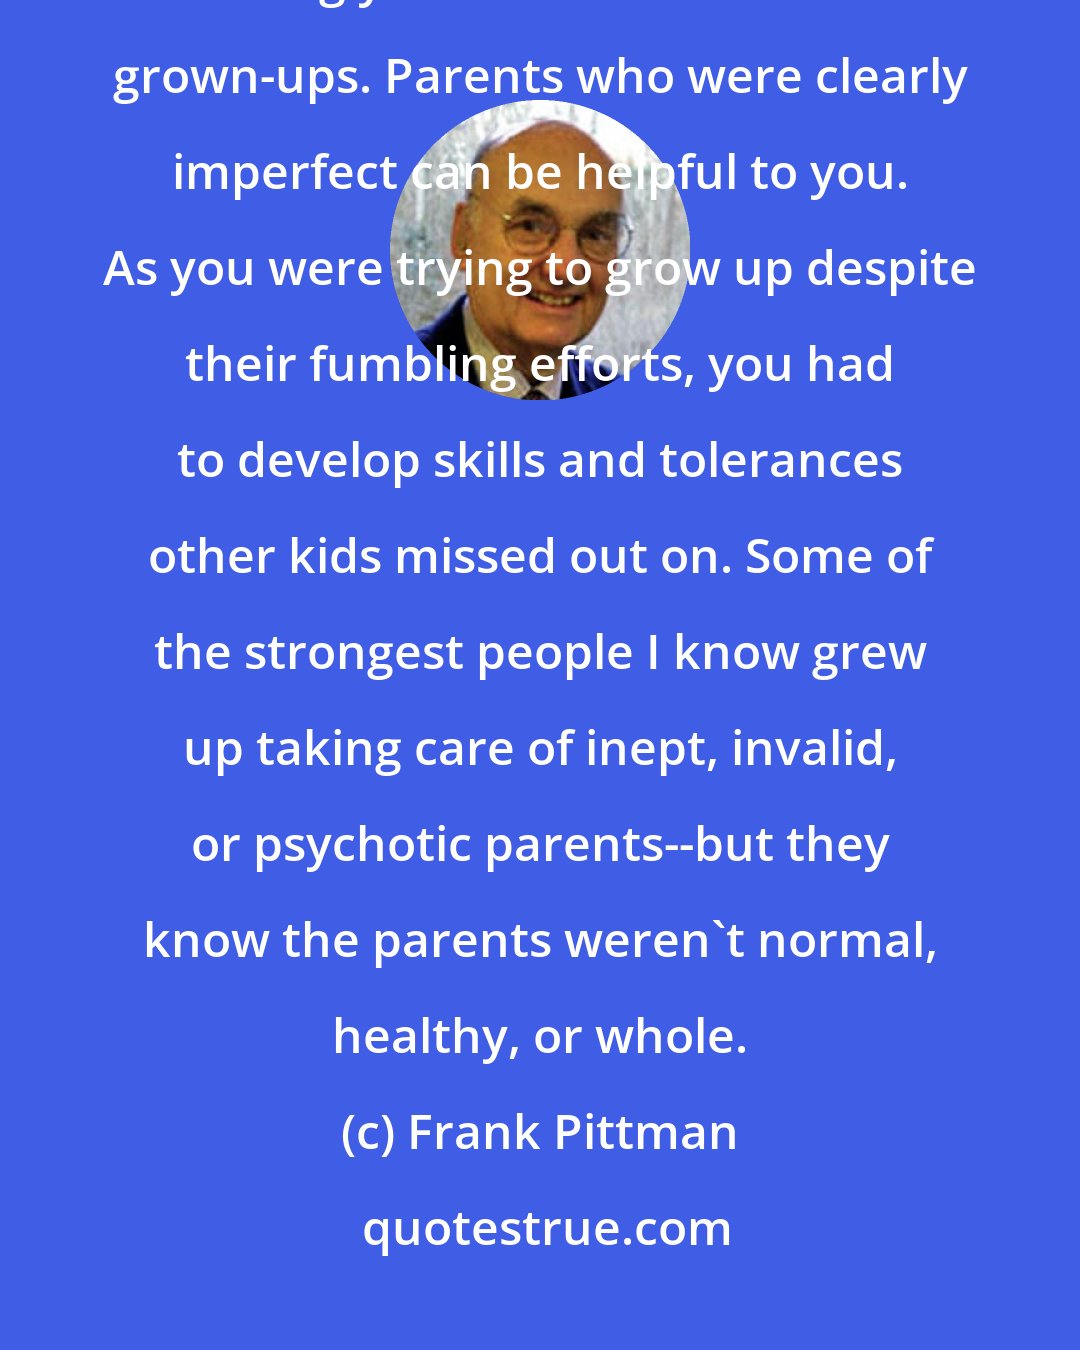 Frank Pittman: Some parents were awful back then and are awful still. The process of raising you didn't turn them into grown-ups. Parents who were clearly imperfect can be helpful to you. As you were trying to grow up despite their fumbling efforts, you had to develop skills and tolerances other kids missed out on. Some of the strongest people I know grew up taking care of inept, invalid, or psychotic parents--but they know the parents weren't normal, healthy, or whole.